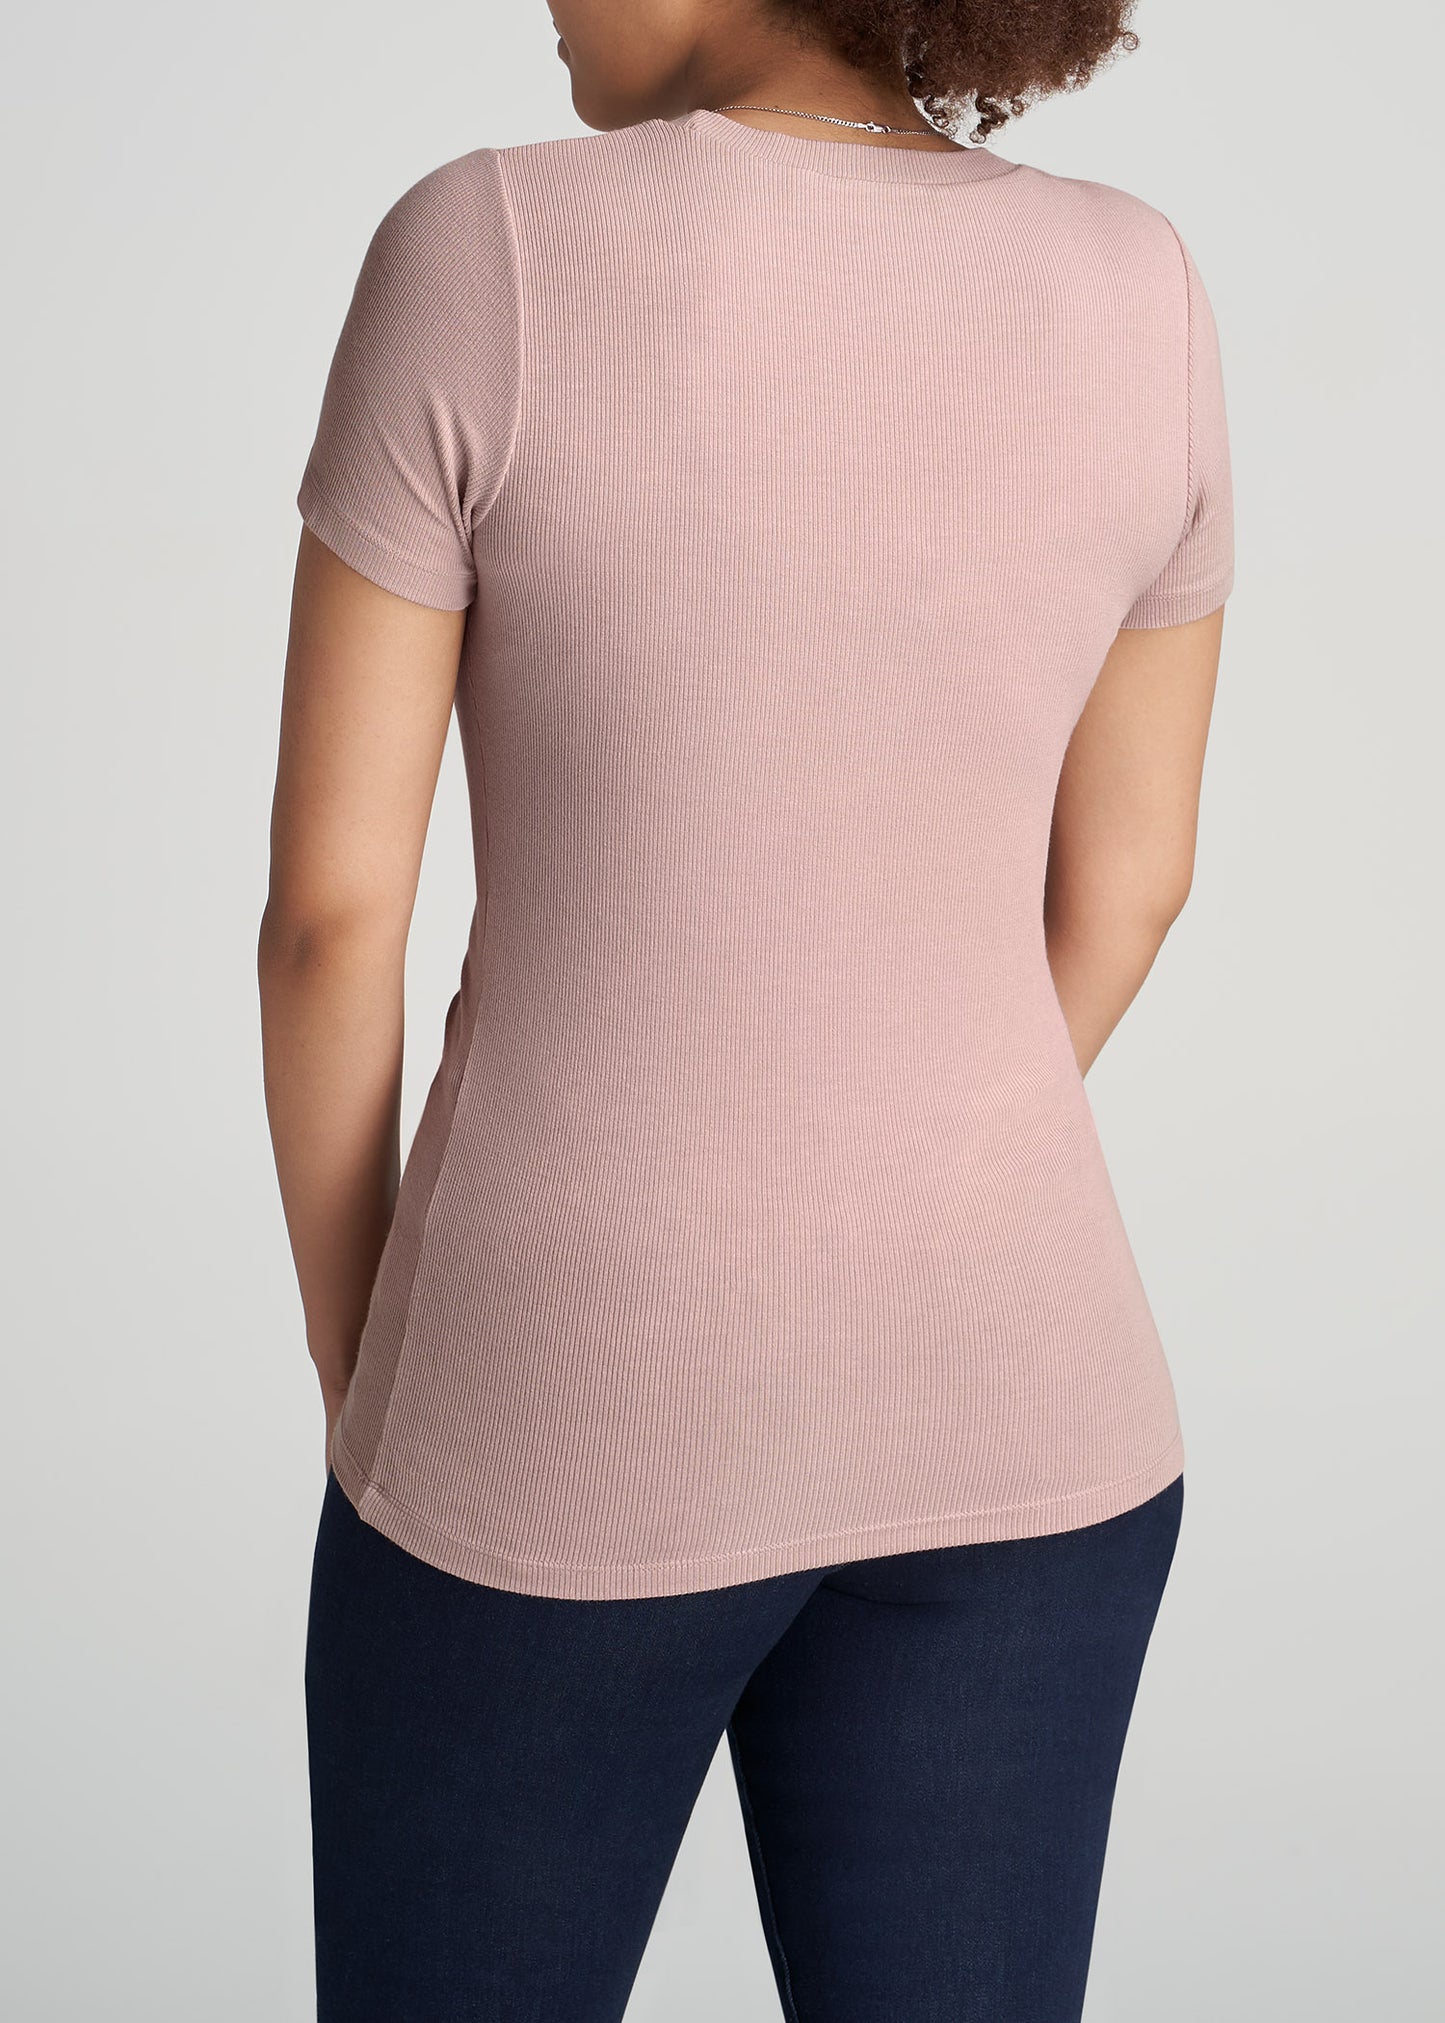 American-Tall-Women-Ribbed-Tee-BallerinaPink-back